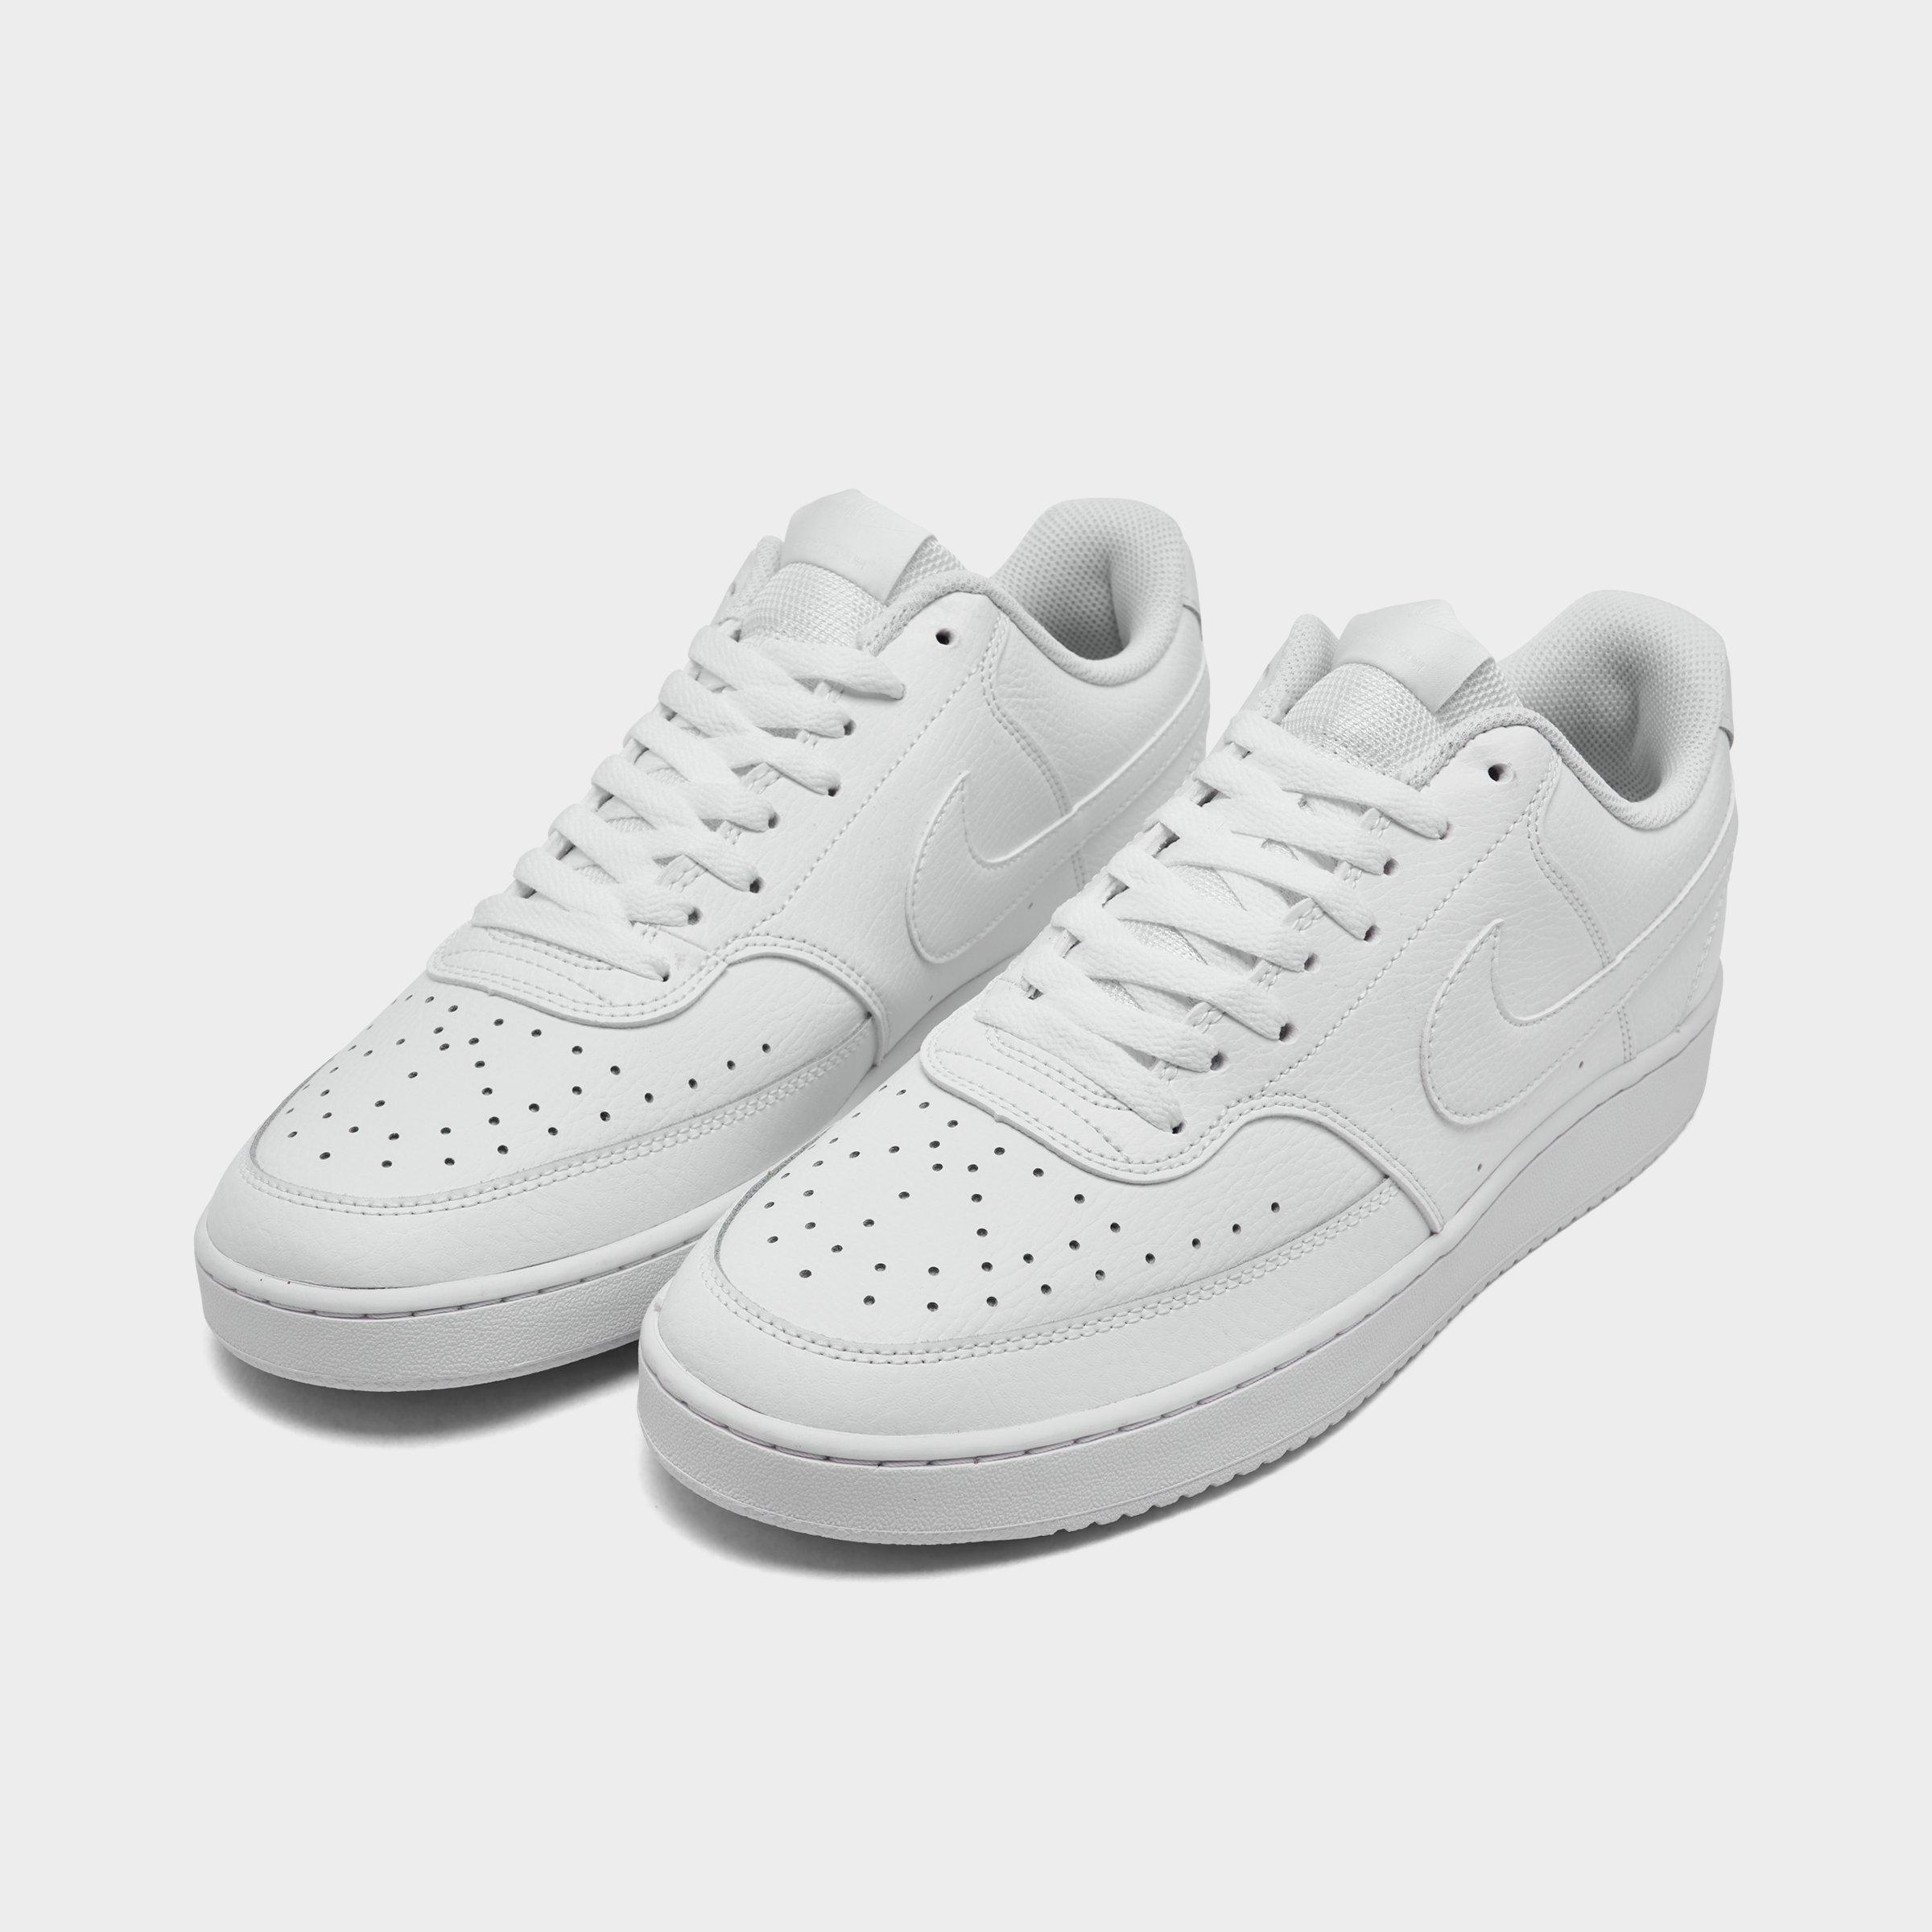 men's nikecourt vision low casual sneakers